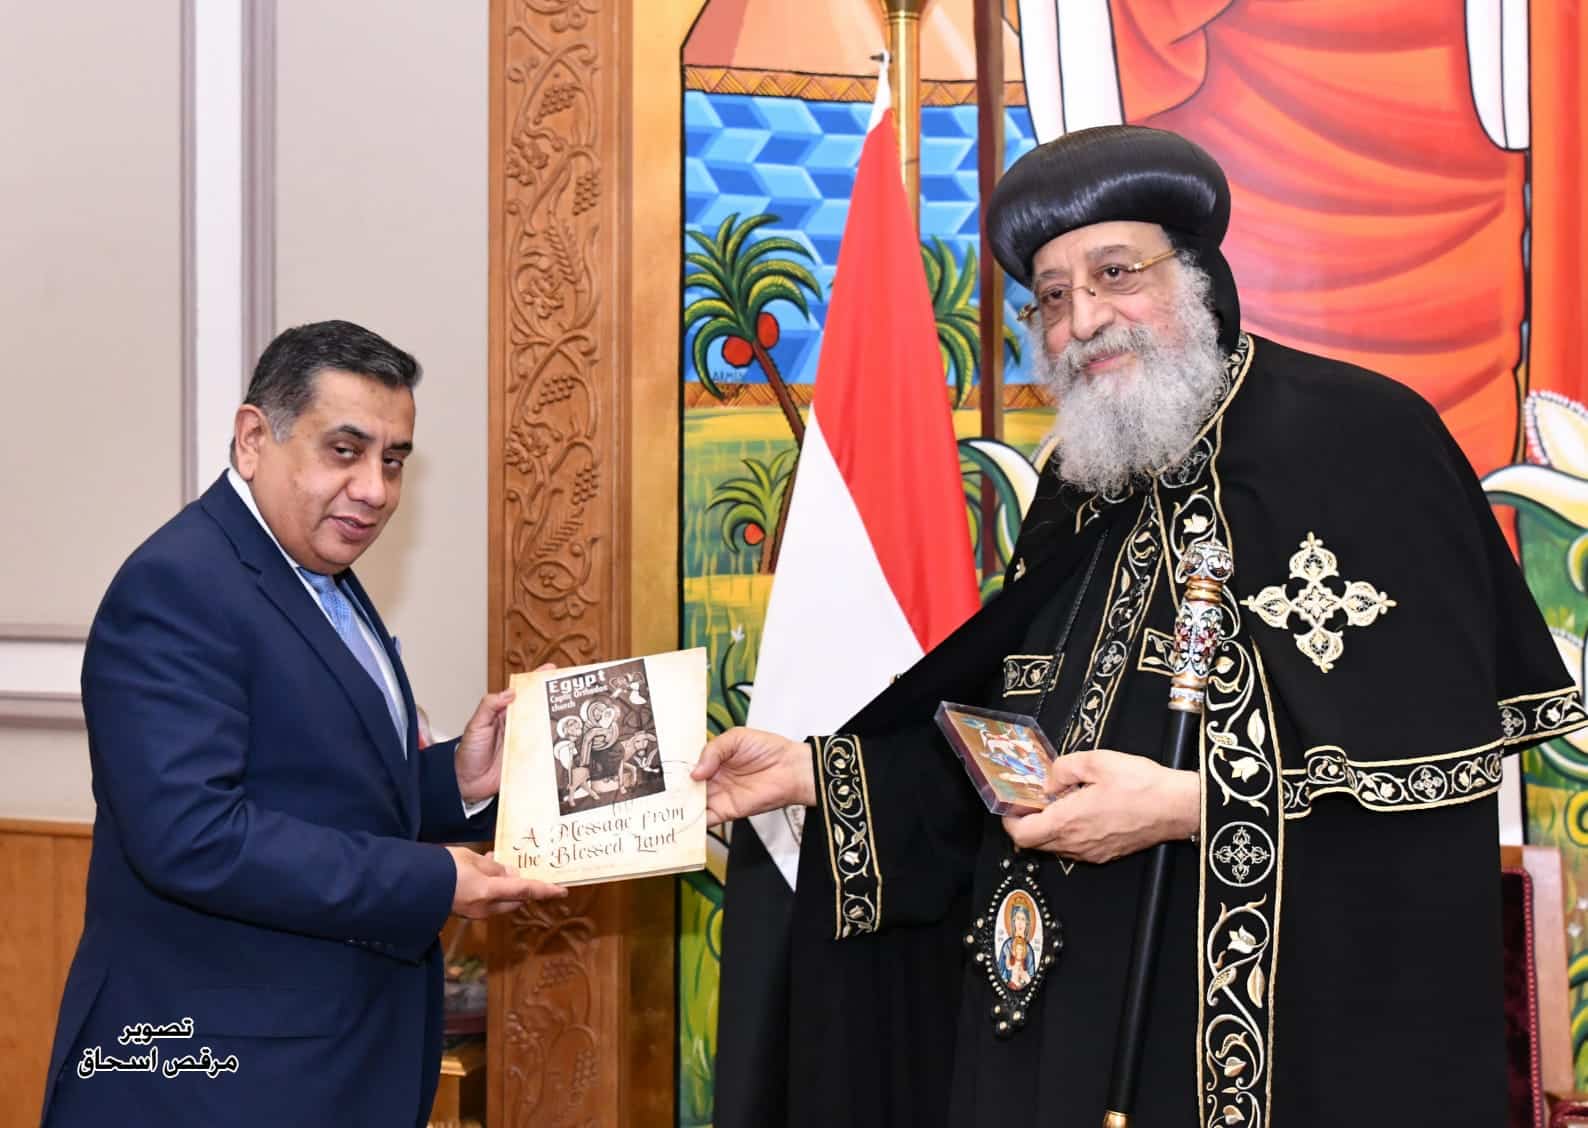 Pope Tawadros II Received Lord Tariq Ahmad, UK Minister of State for the Middle East, North Africa, South Asia and the United Nations